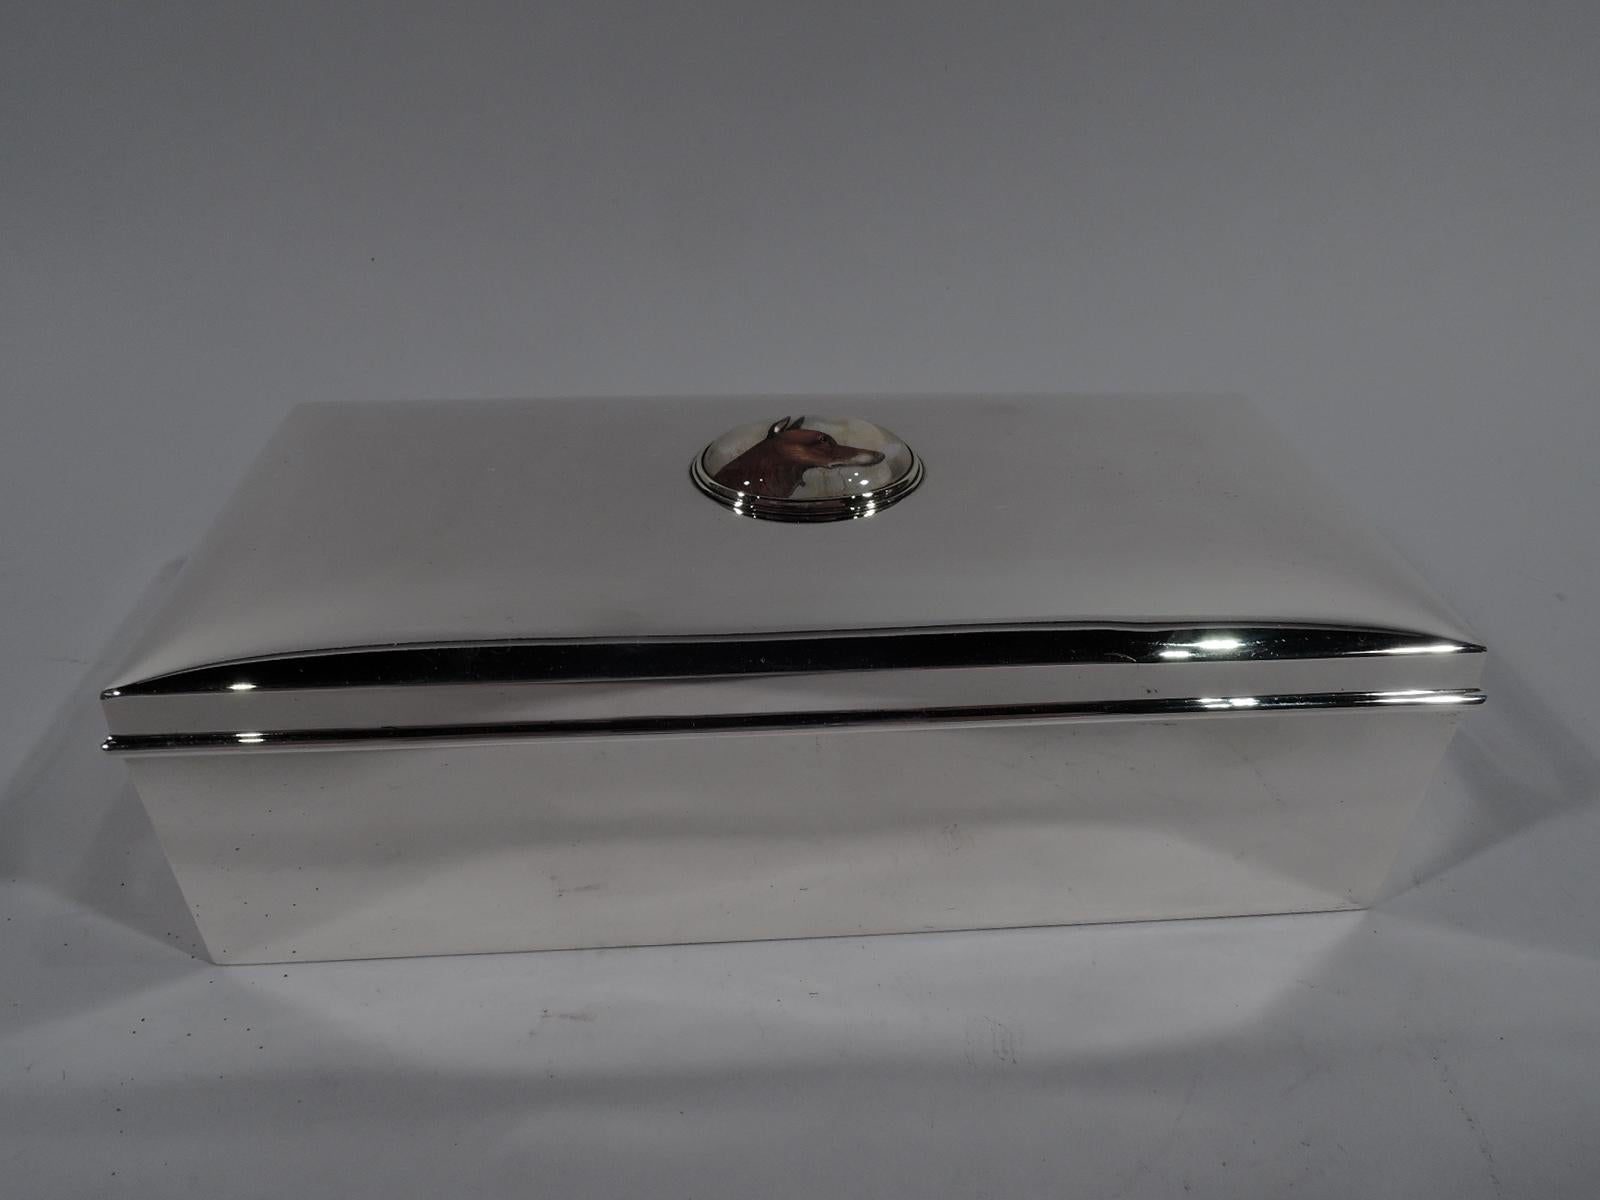 American sterling silver box with hunt motif, circa 1930. Rectangular with straight sides. Cover hinged and gently curved; mounted to cover top is Essex crystal depicting a fox in profile. Box interior cedar lined. Cover interior gilt washed. Fully